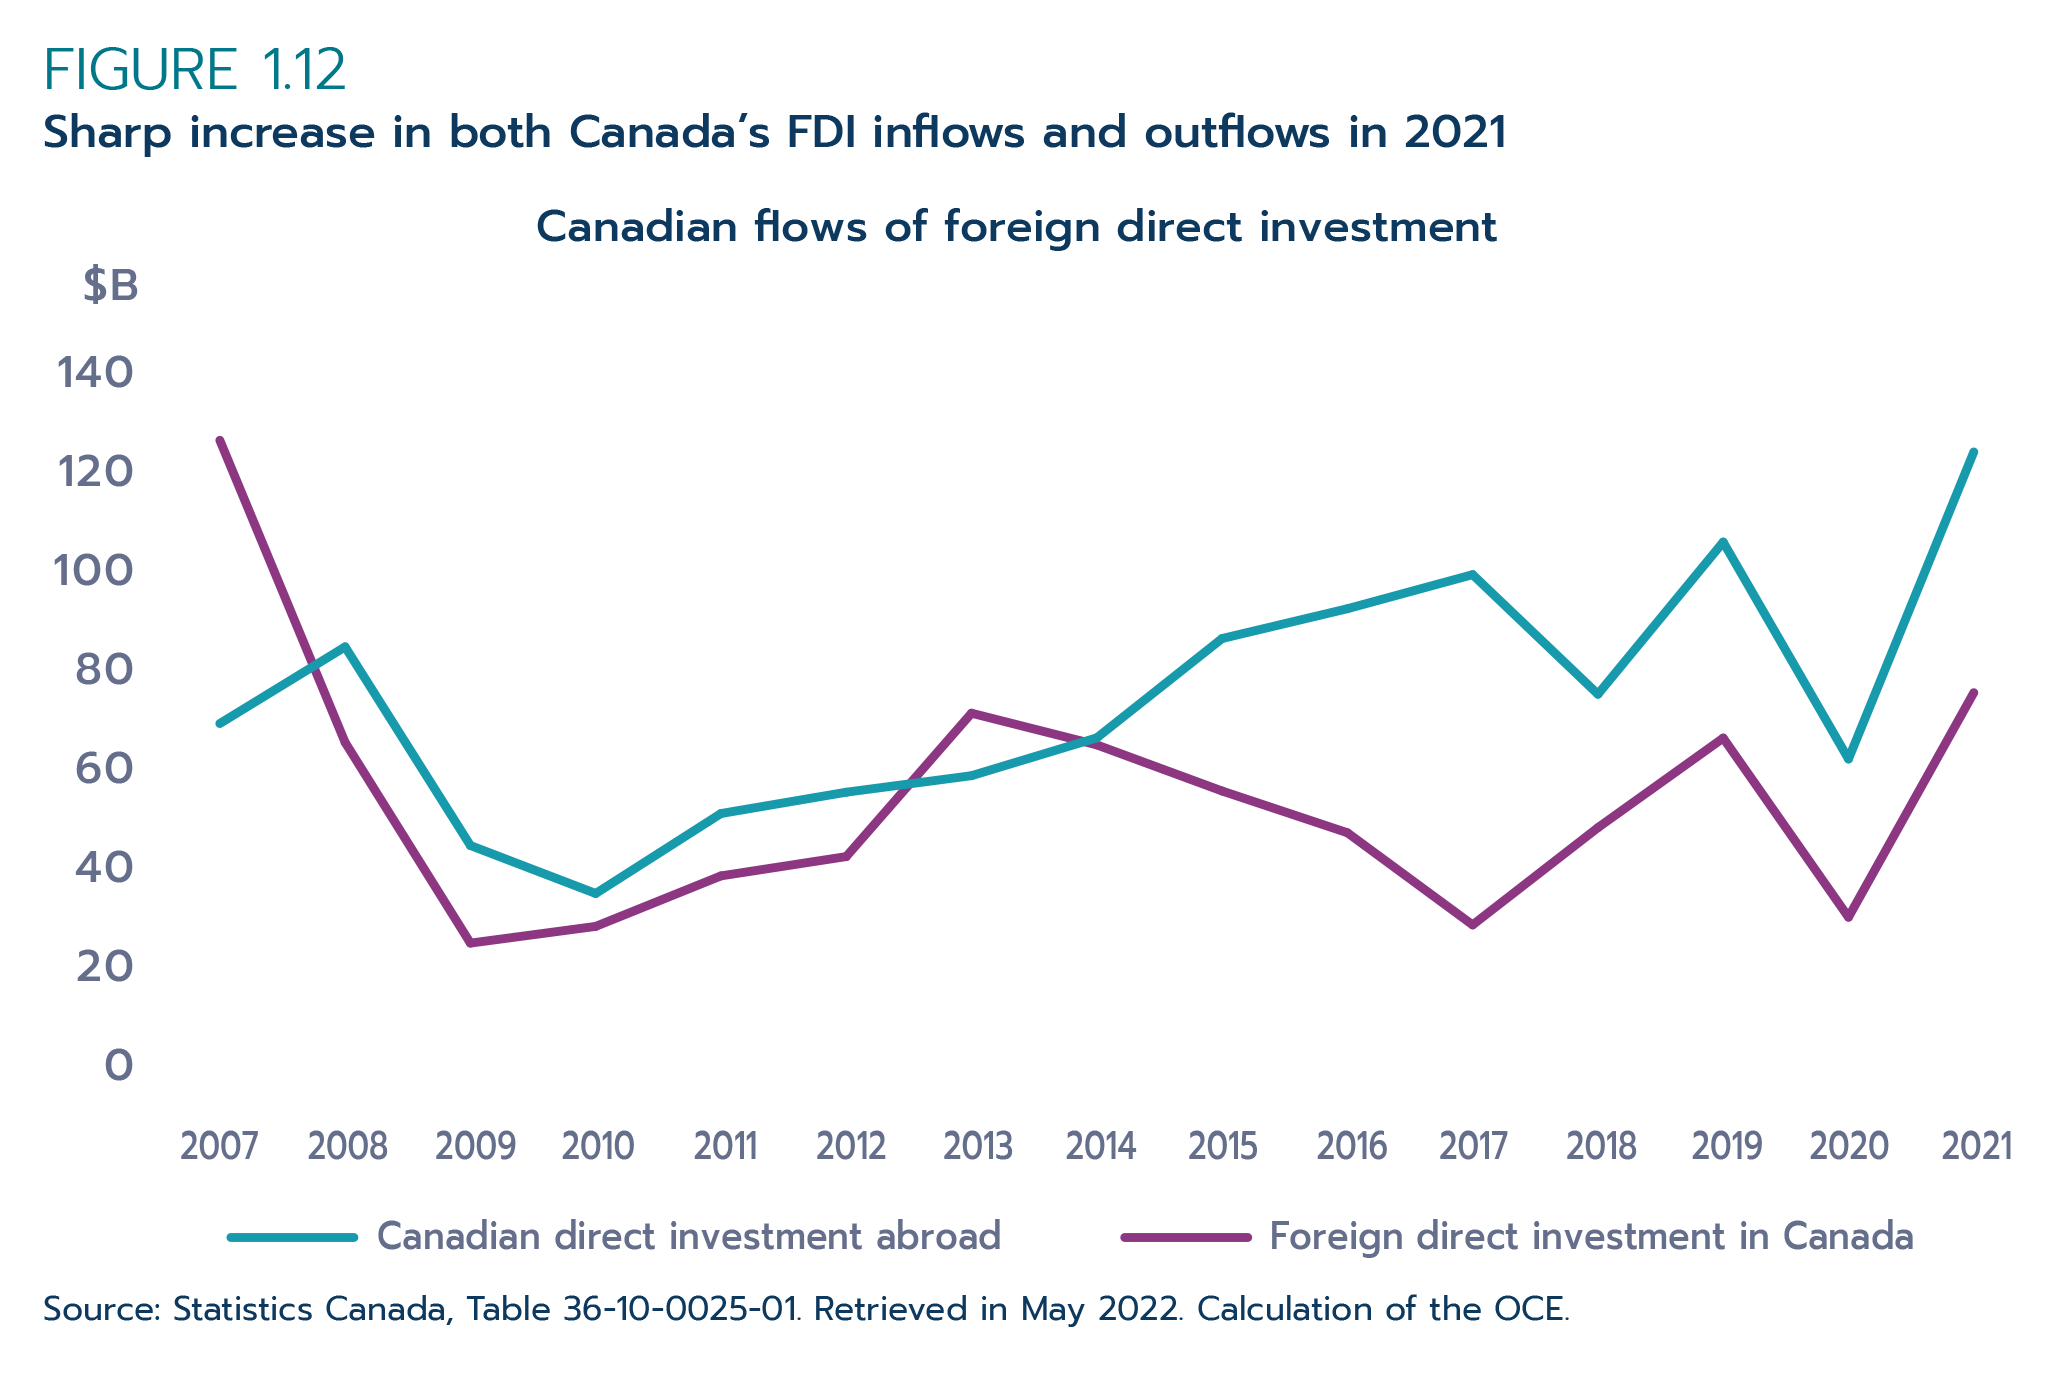 Figure 1.12: Sharp increase in both Canada’s FDI inflows and outflows in 2021